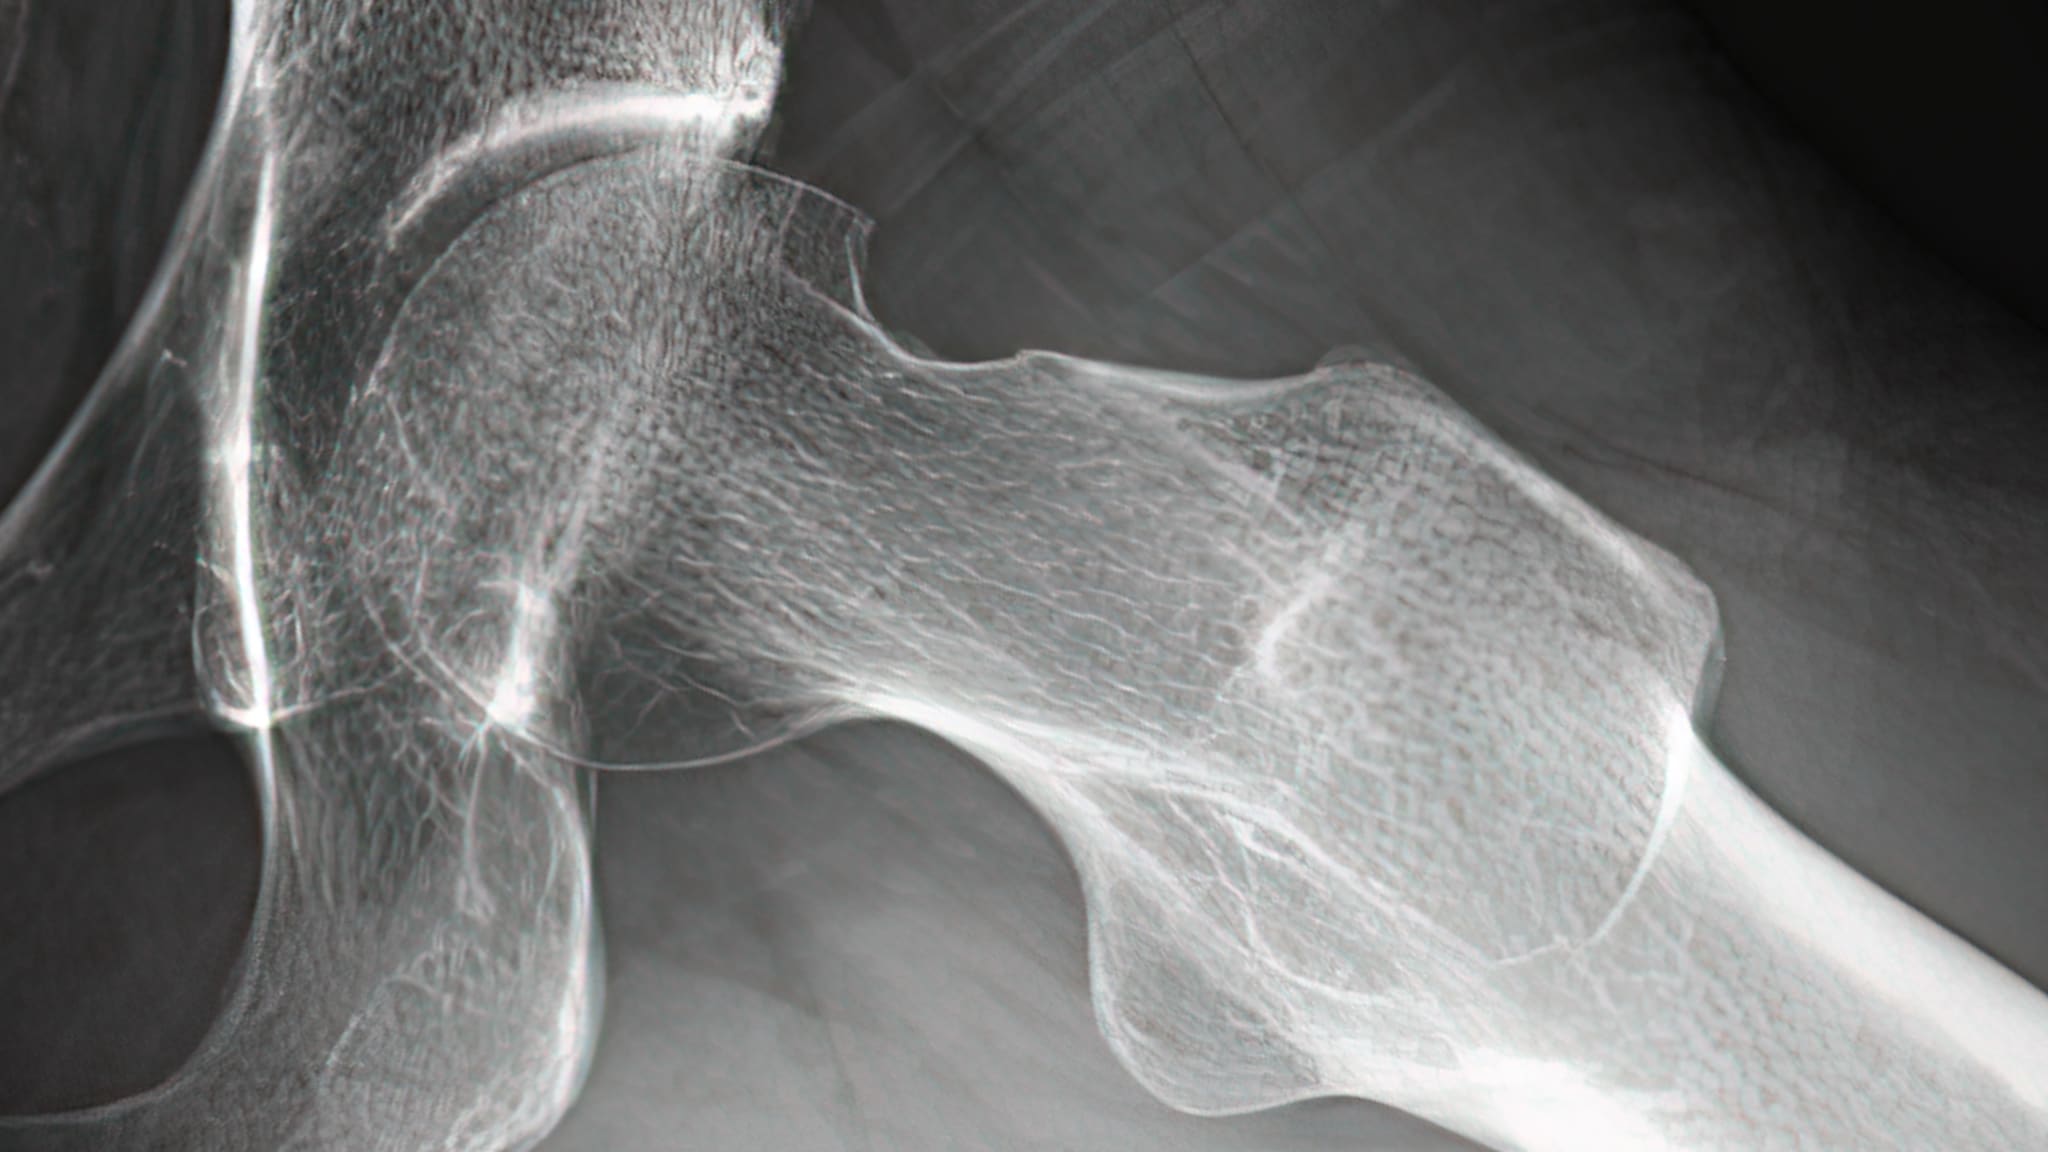 Revision Osteochondroplasty for an Overresected Femoral Neck